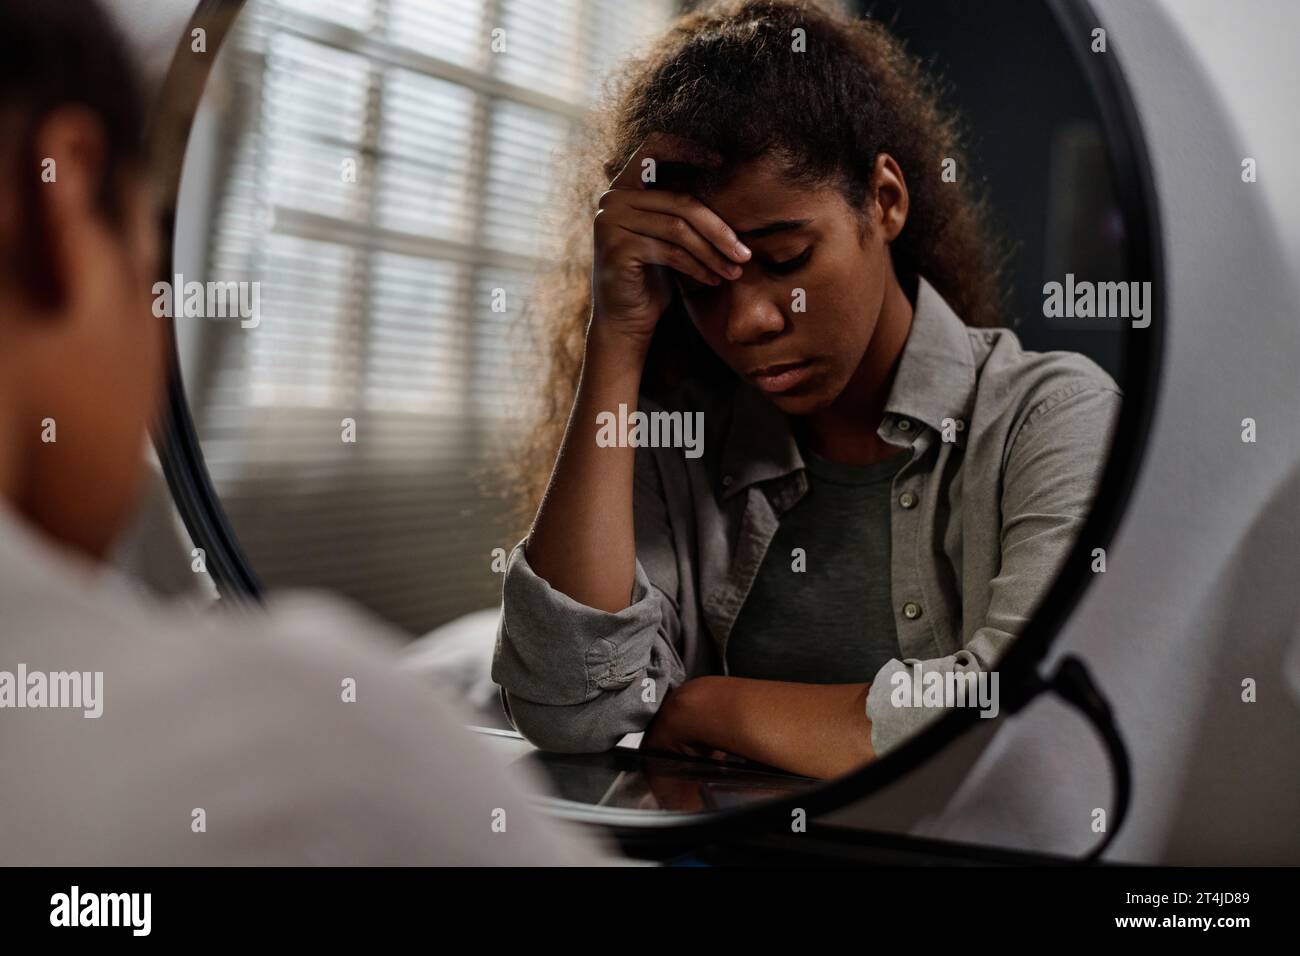 Offended teenage girl touching her forehead while sitting in front of mirror and thinking about cyberbullying messages from someone anonymous Stock Photo